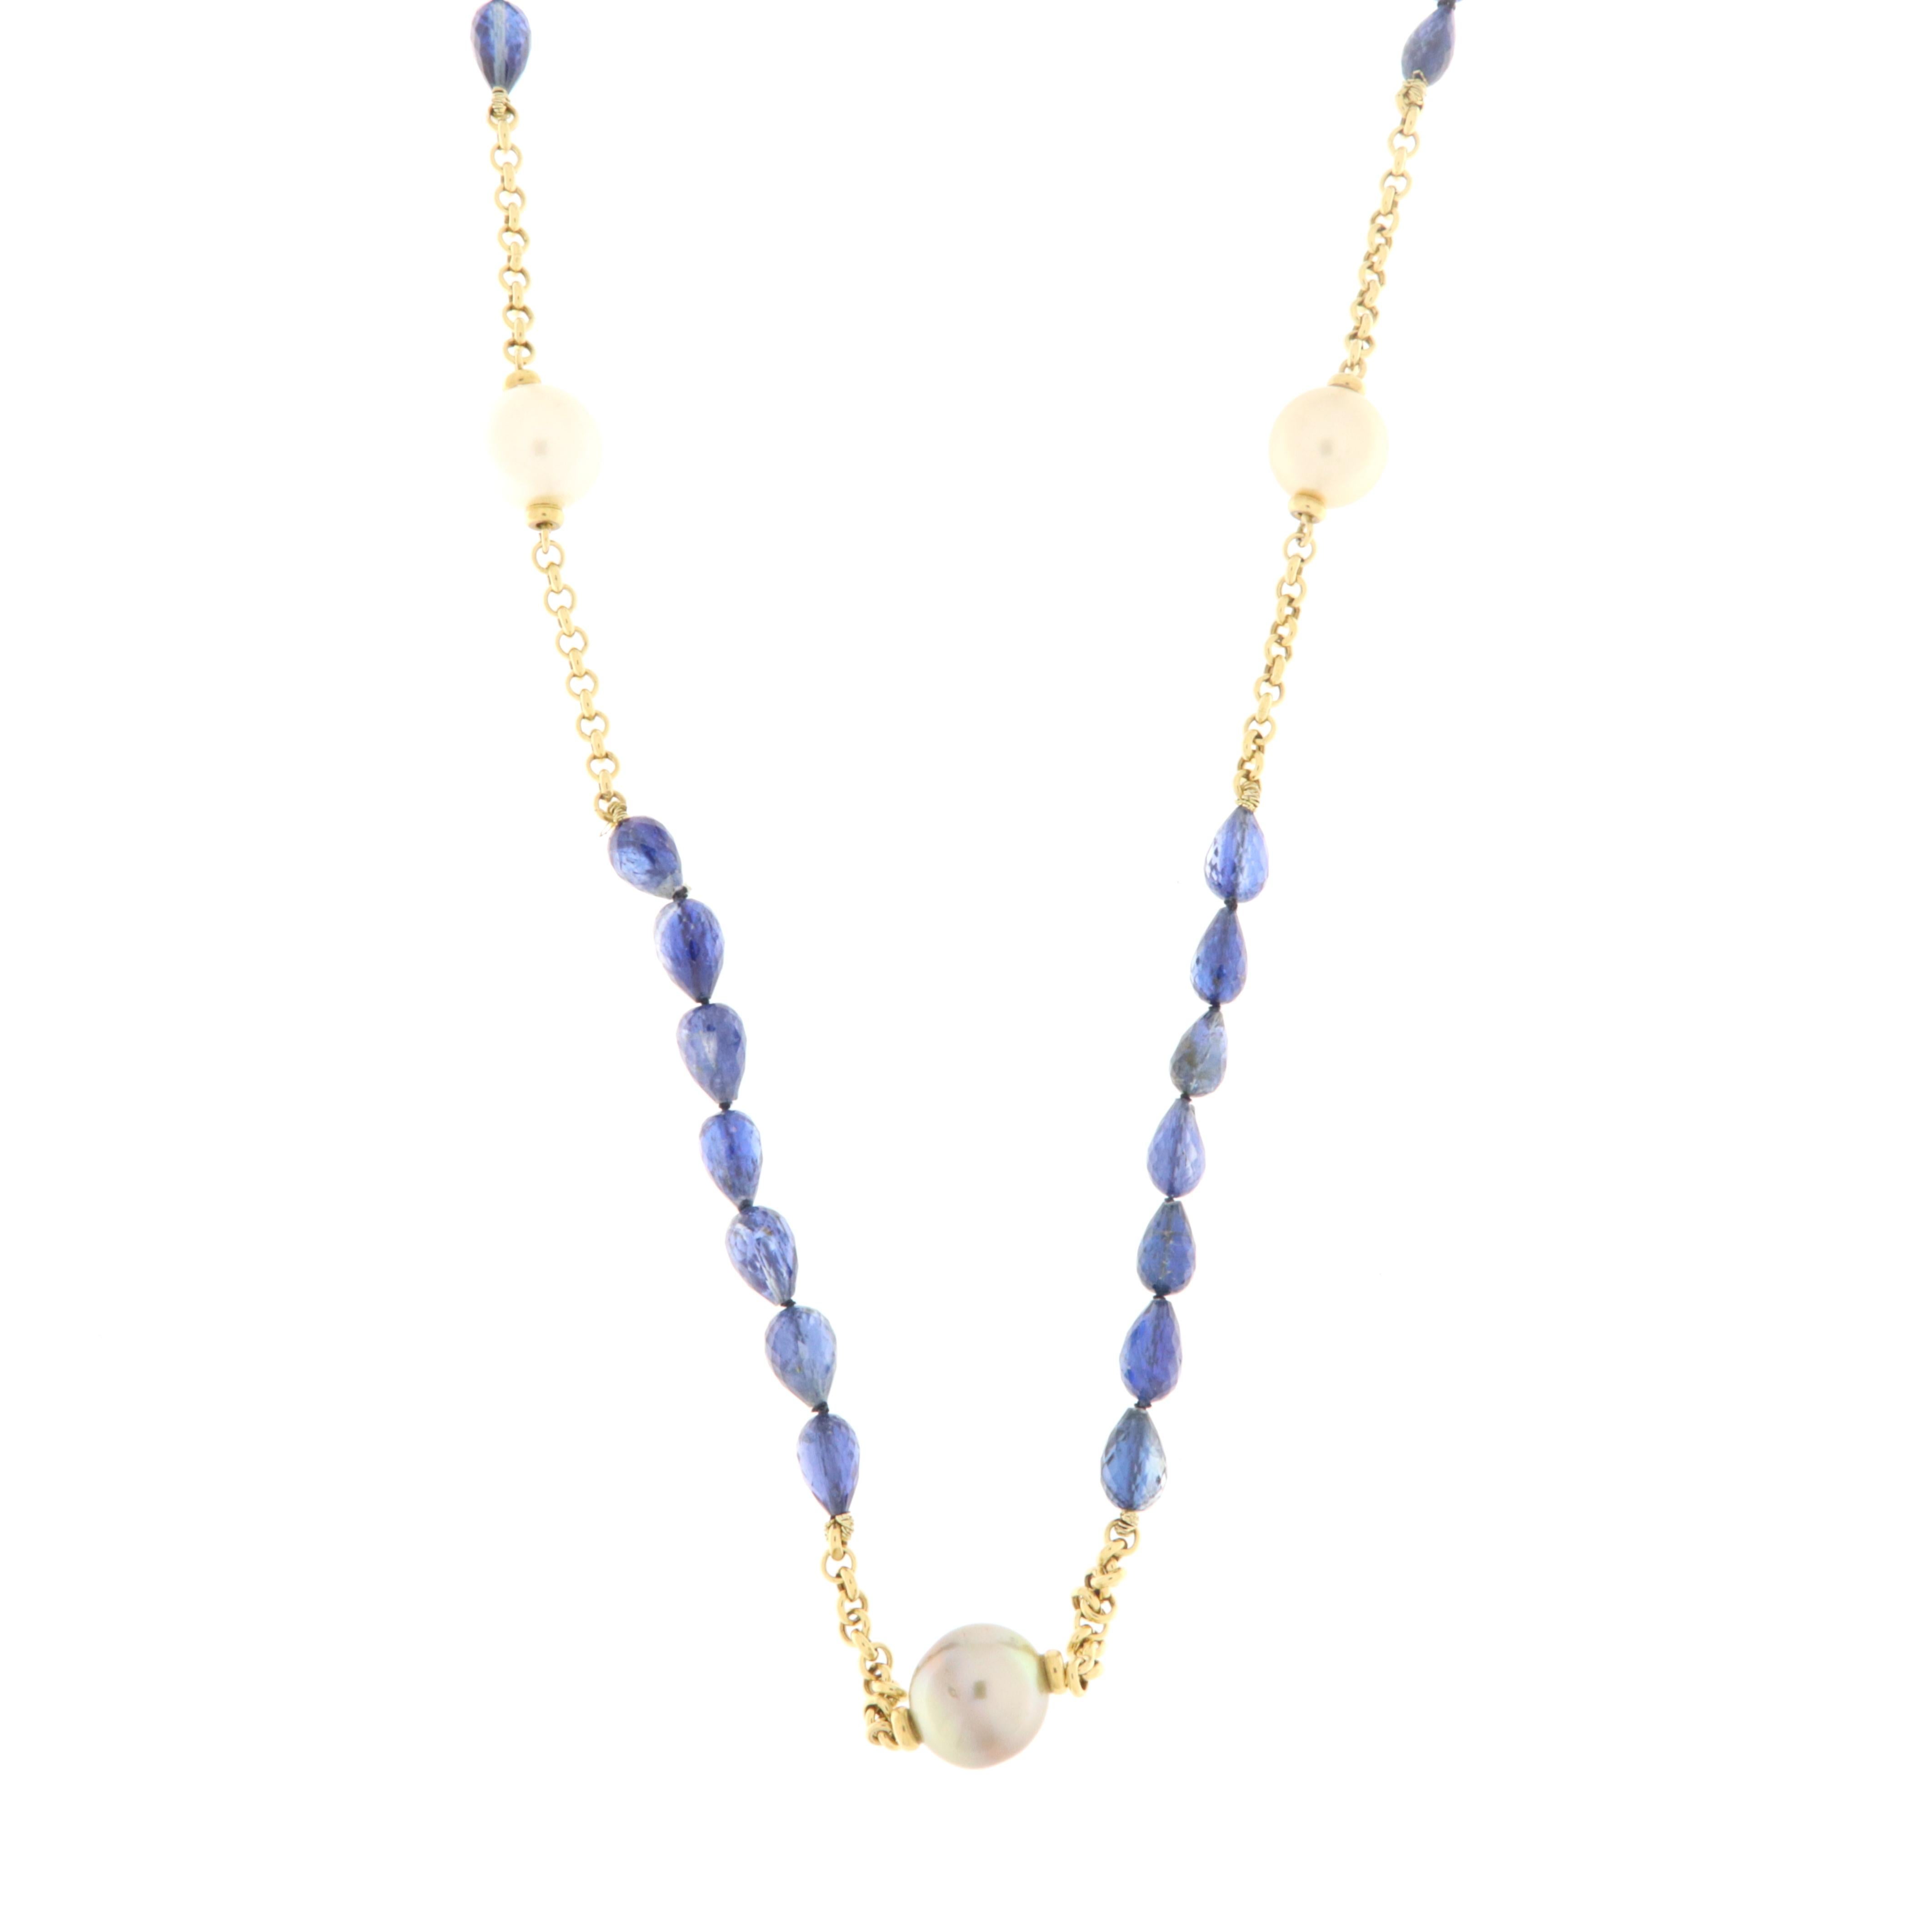 Briolette Cut Yellow Gold Long Necklace 18k with Australian Pearls and Kyanite